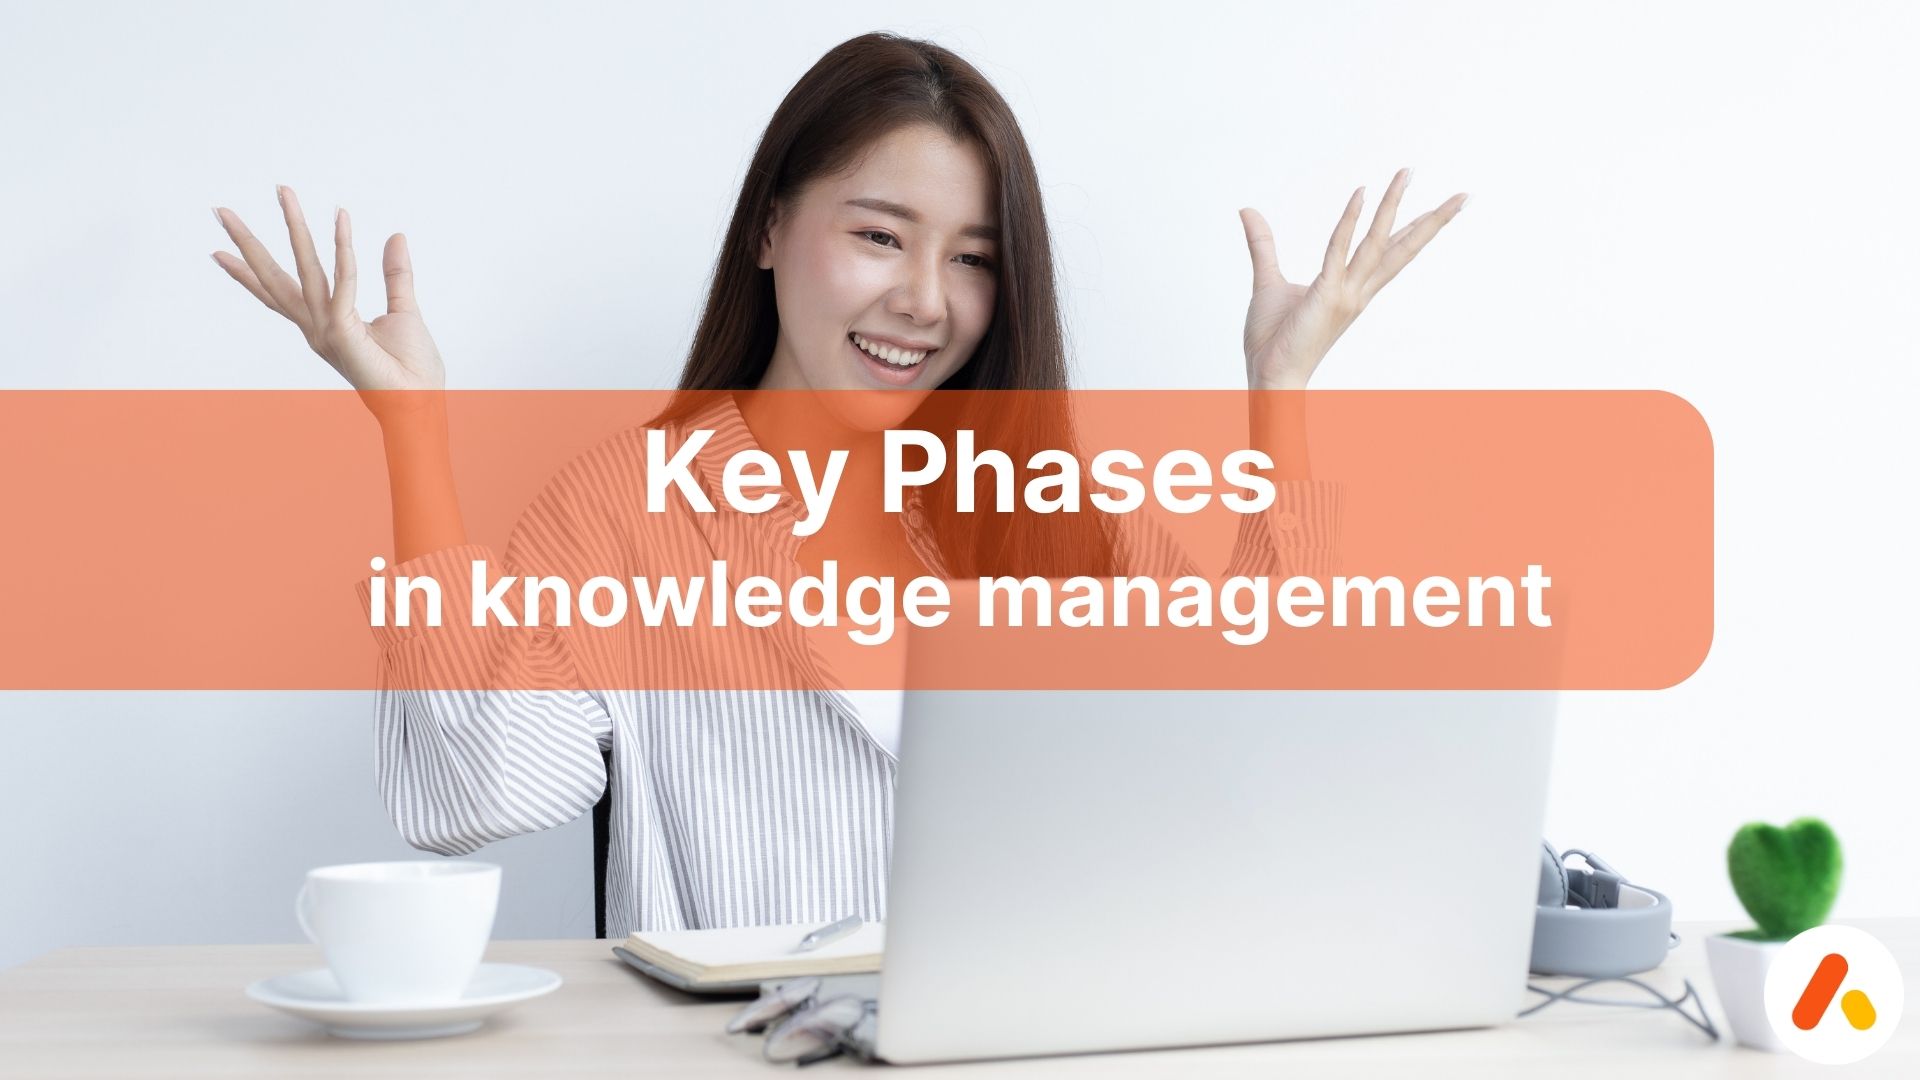 Key phases in knowledge management